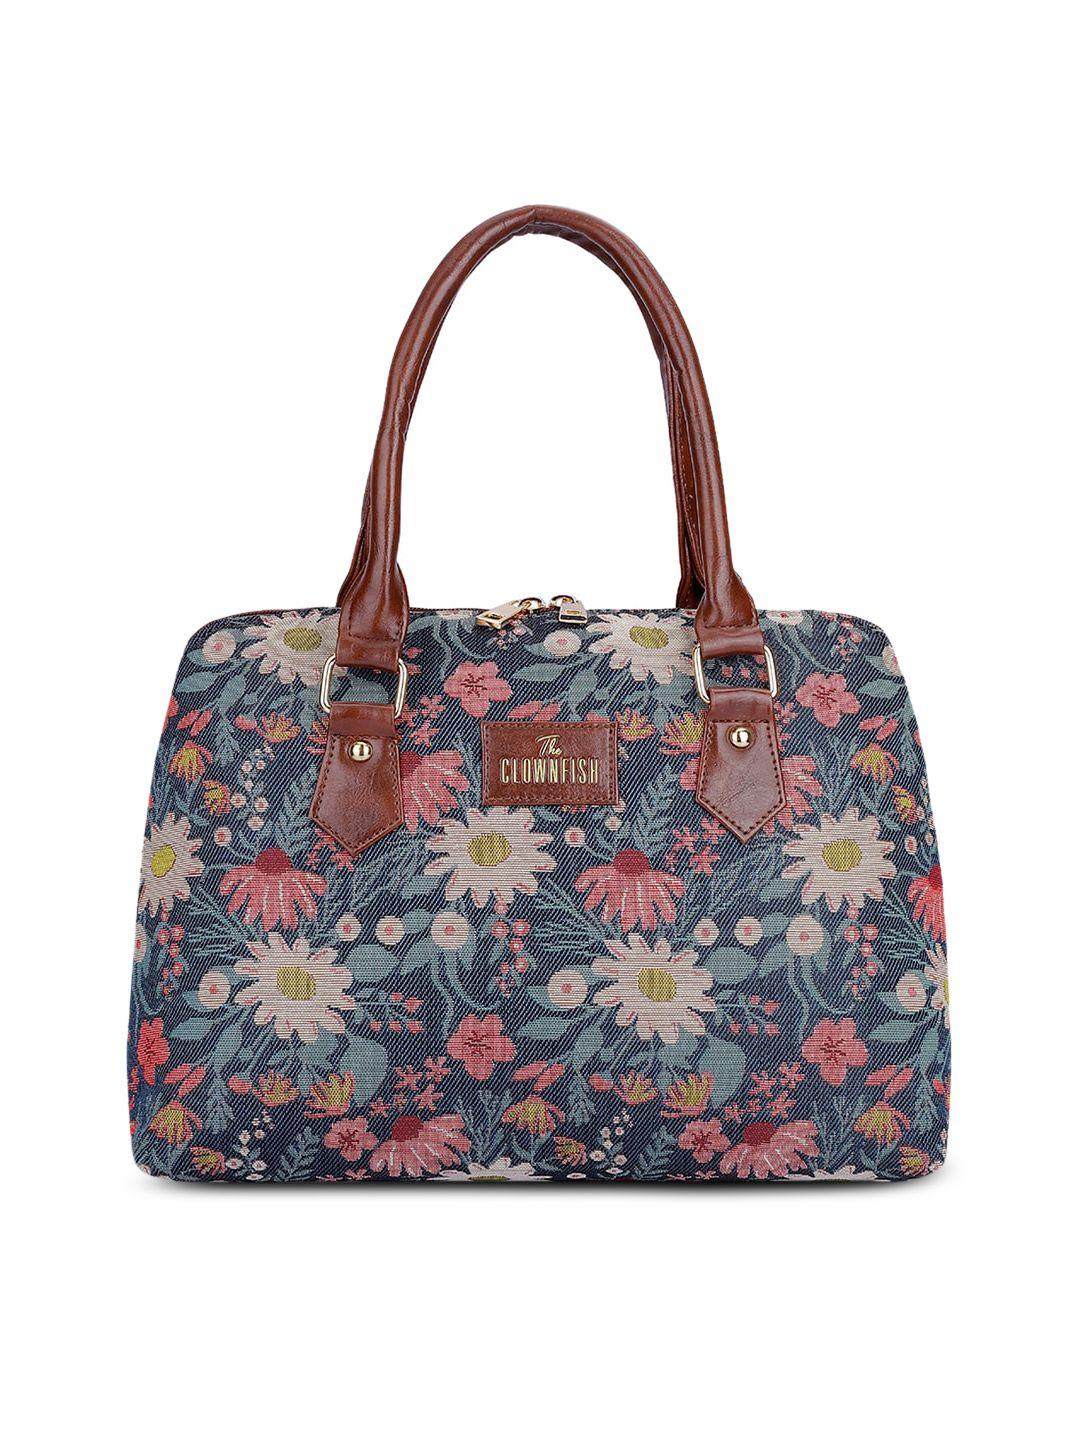 the clownfish floral printed structured handheld bag